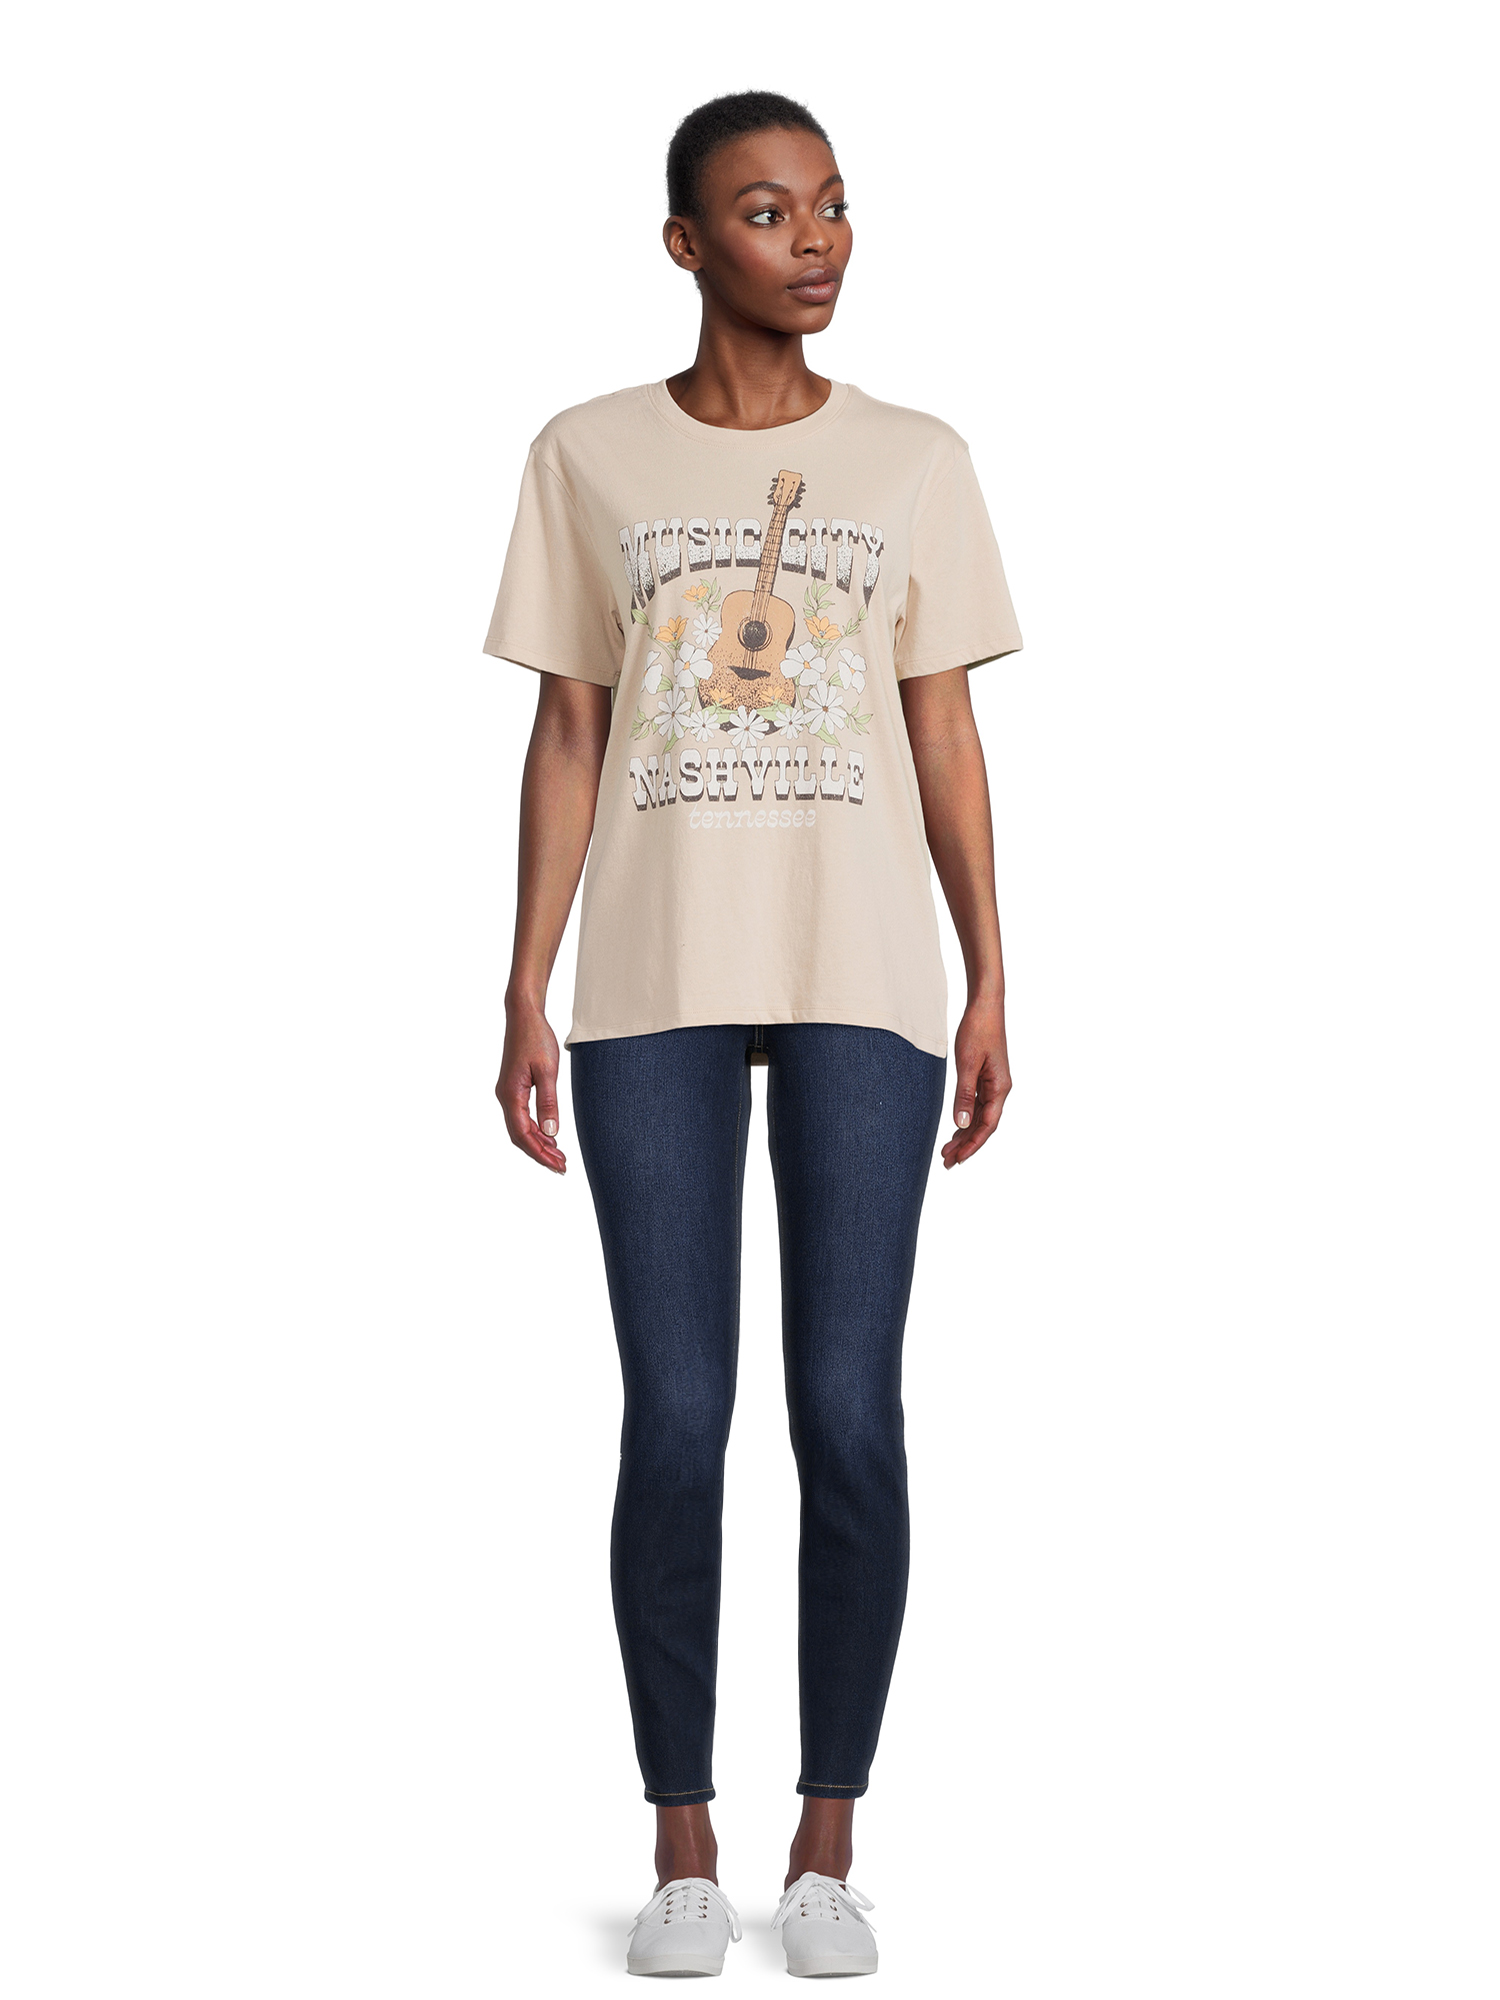 Time and Tru Women's Short Sleeve Destination Graphic Tee - image 5 of 5